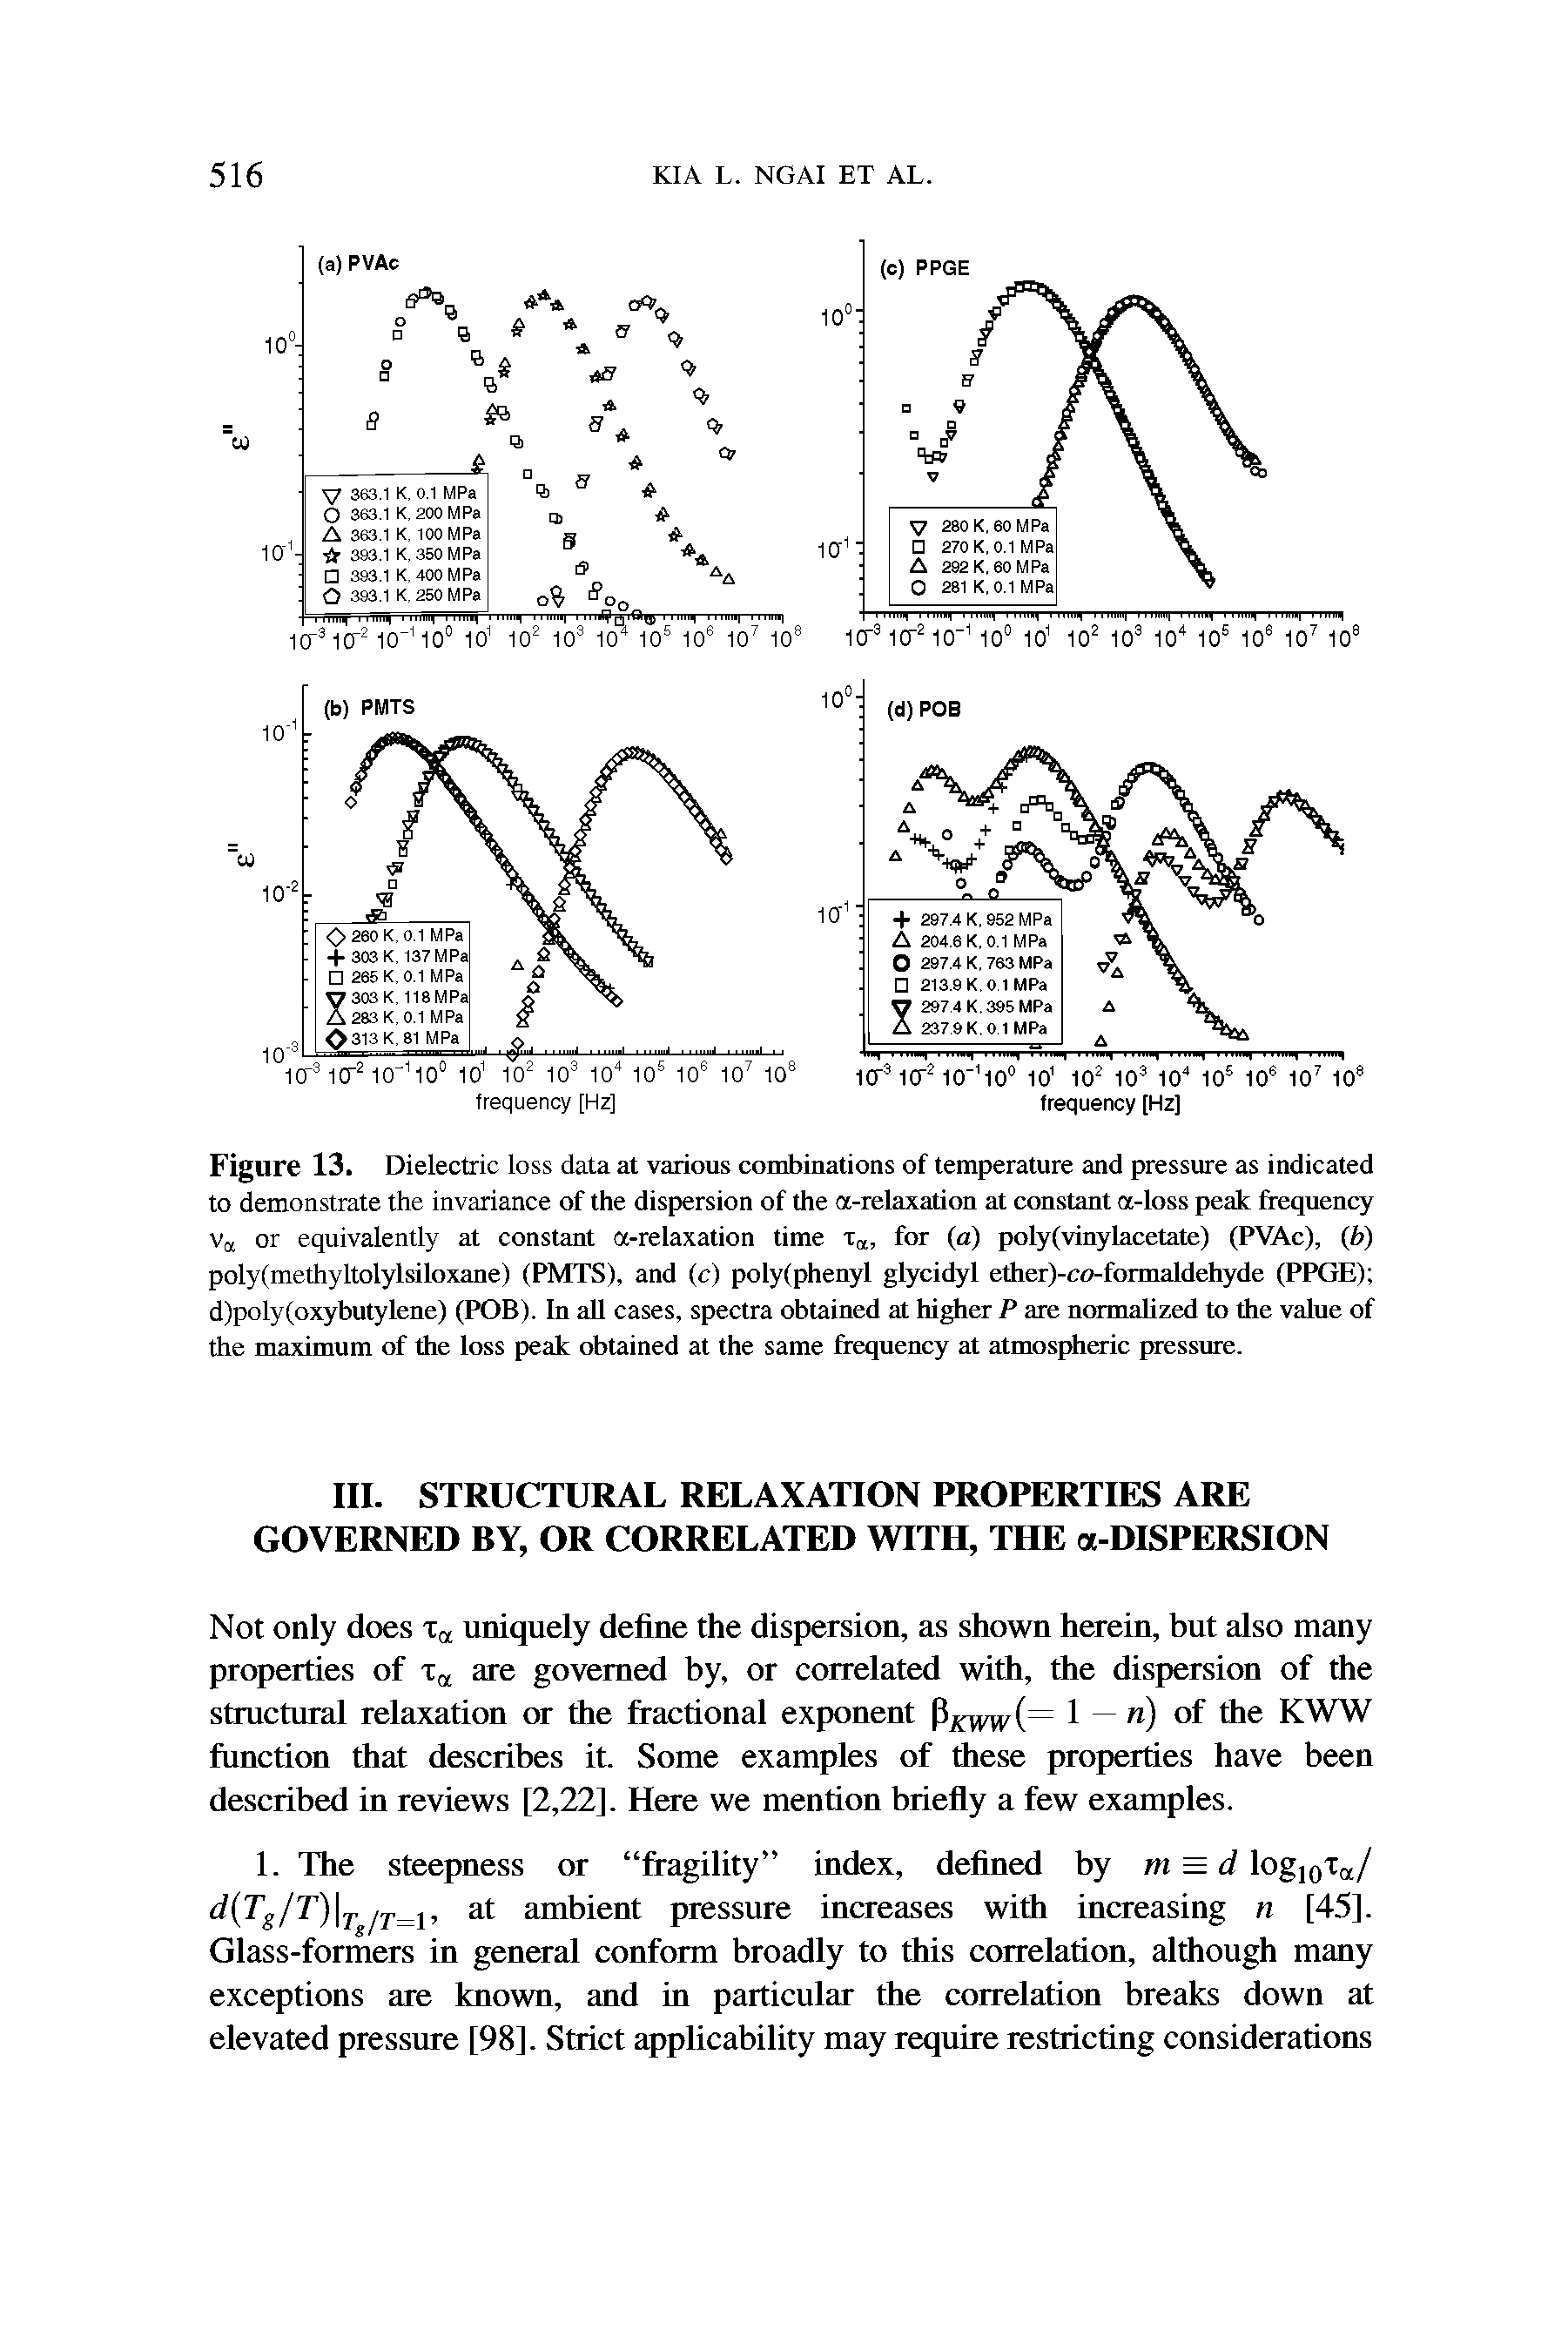 Figure 13. Dielectric loss data at various combinations of temperature and pressure as indicated to demonstrate the invariance of the dispersion of the a-relaxation at constant a-loss peak frequency va or equivalently at constant a-relaxation time for (a) poly(vinylacetate) (PVAc), (b) poly(methyltolylsiloxane) (PMTS), and (c) polyfphenyl glycidyl ether)-co-formaldehyde (PPGE) d)poly(oxy butylene) (POB). In all cases, spectra obtained at higher P are normalized to the value of the maximum of the loss peak obtained at the same frequency at atmospheric pressure.